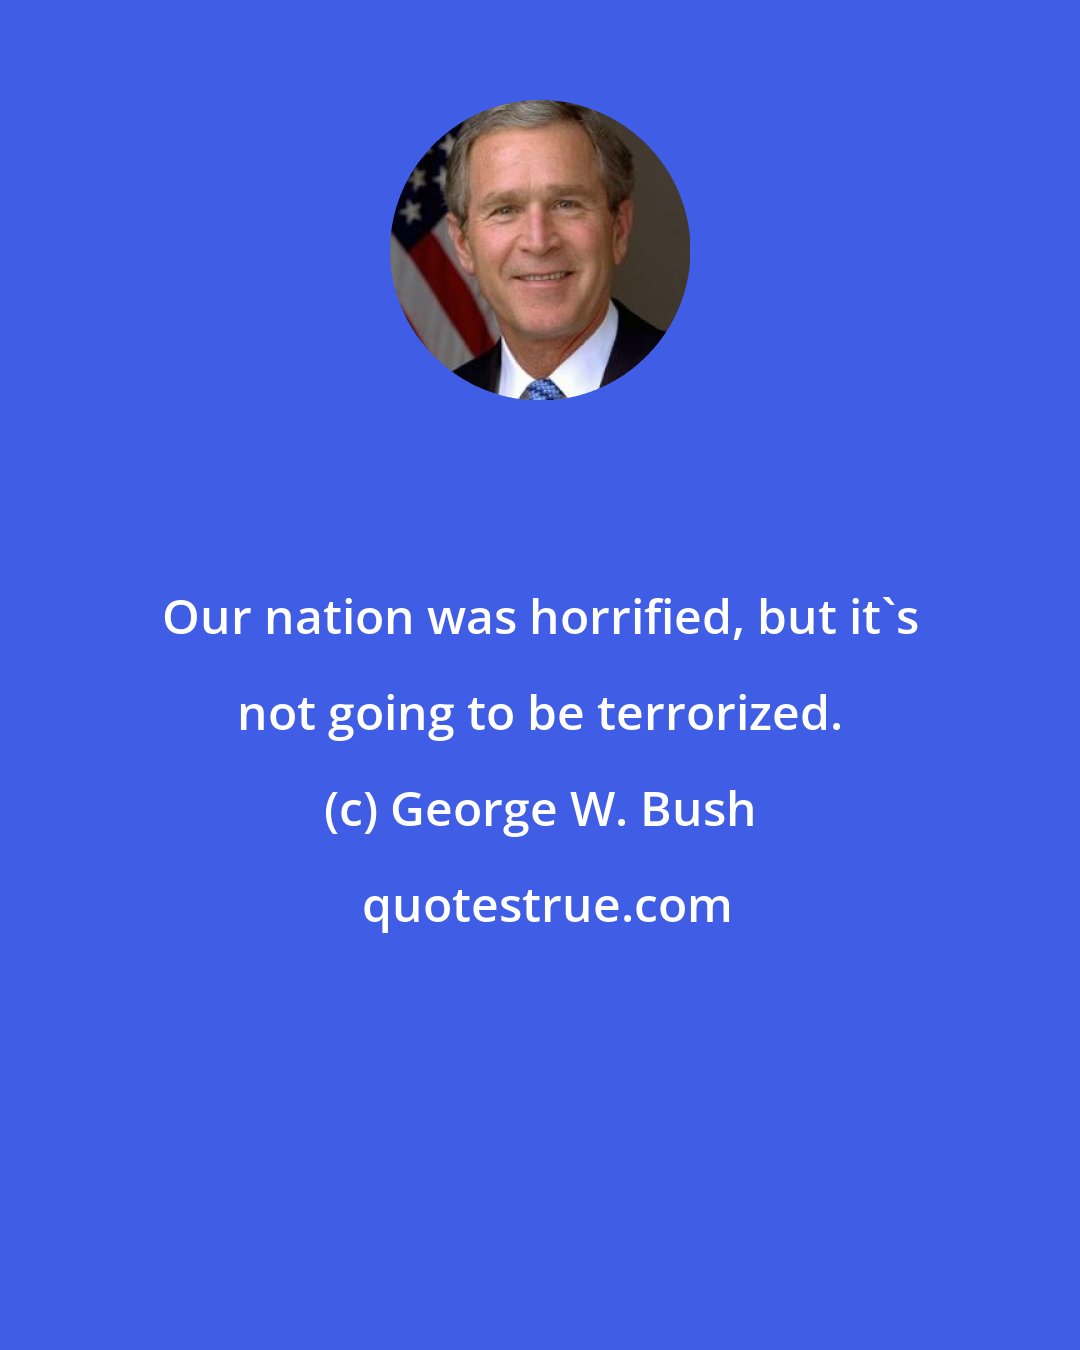 George W. Bush: Our nation was horrified, but it's not going to be terrorized.